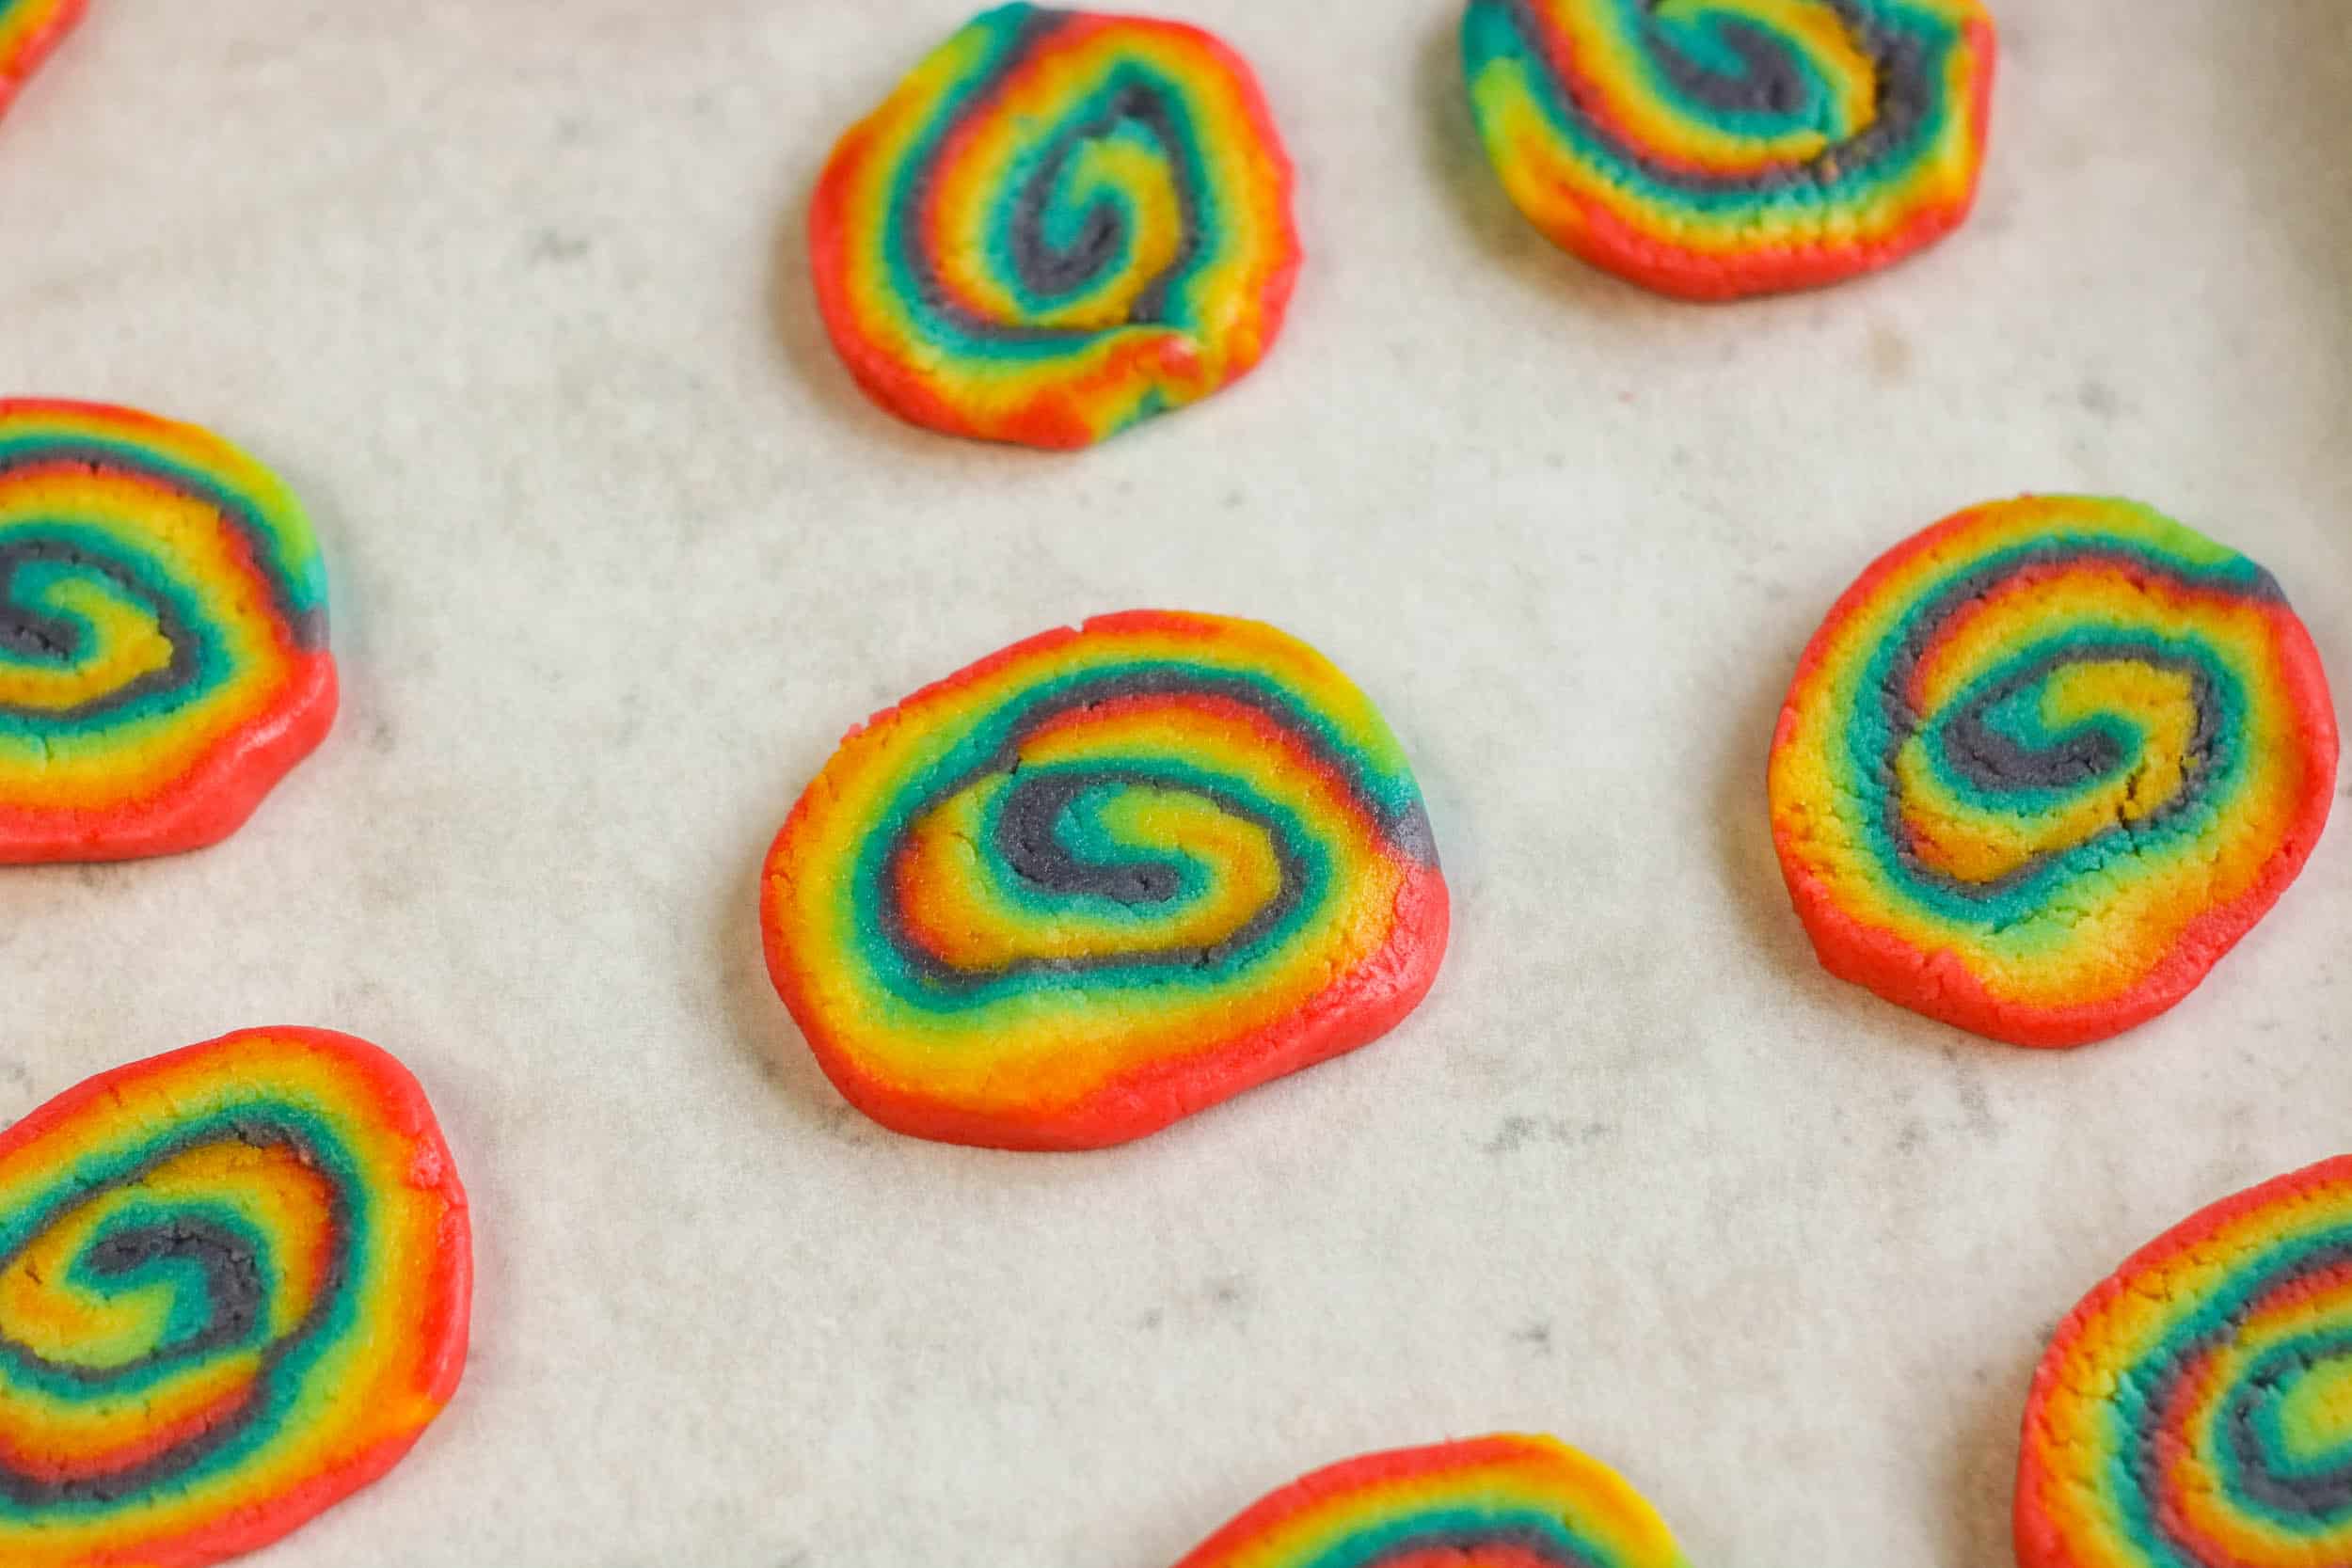 Delicious and colorful rainbow swirl sugar cookies